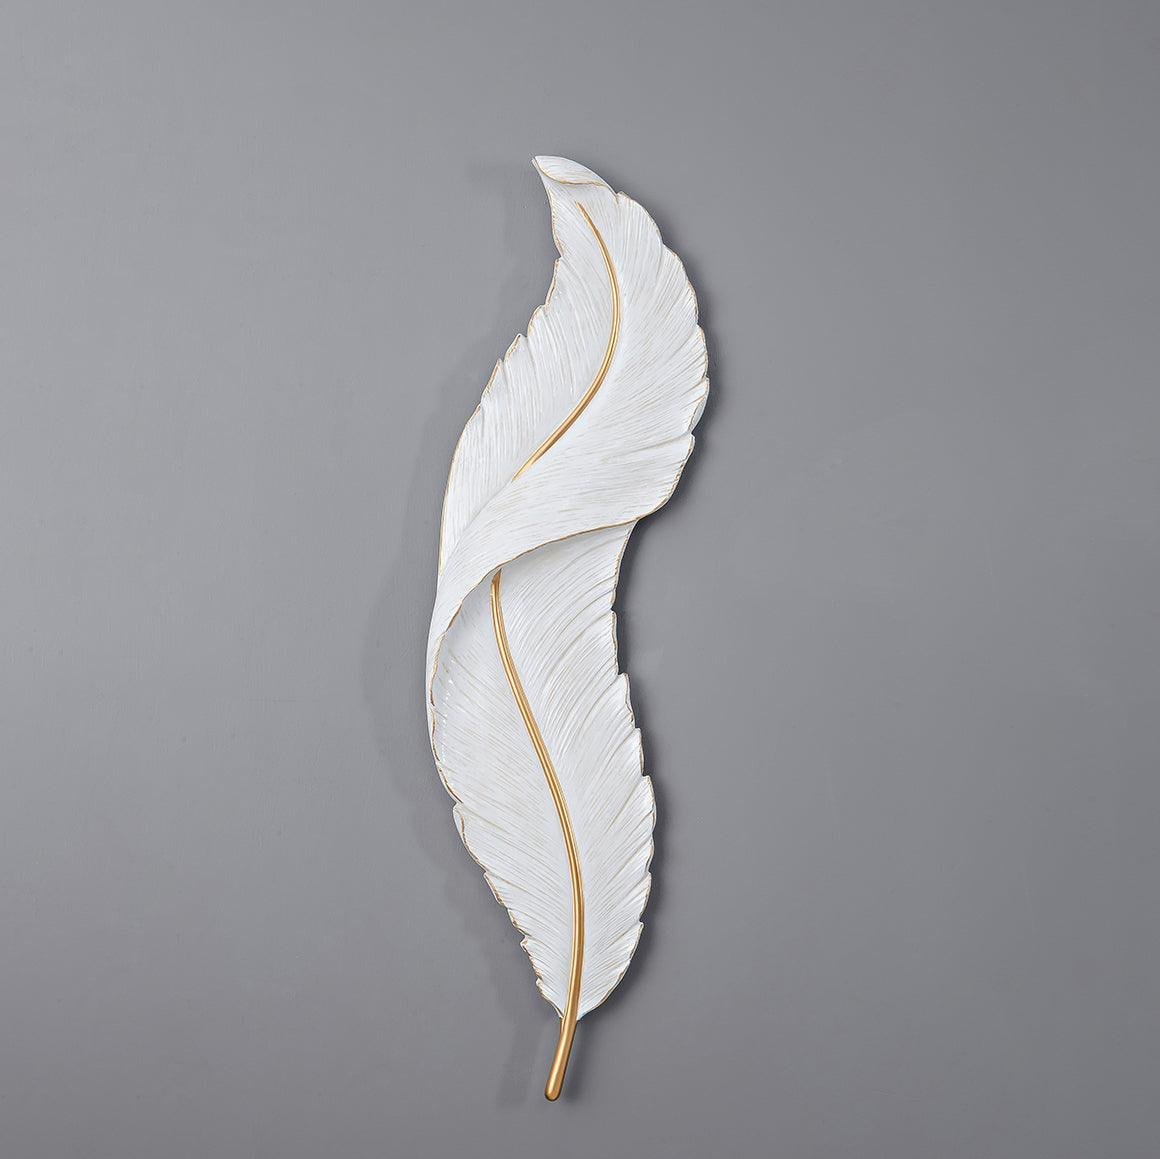 Feather Wall Lamp W 9.4″ x H 35.8″ , W 24cm x H 91cm , White\Gold , Three-color changing light